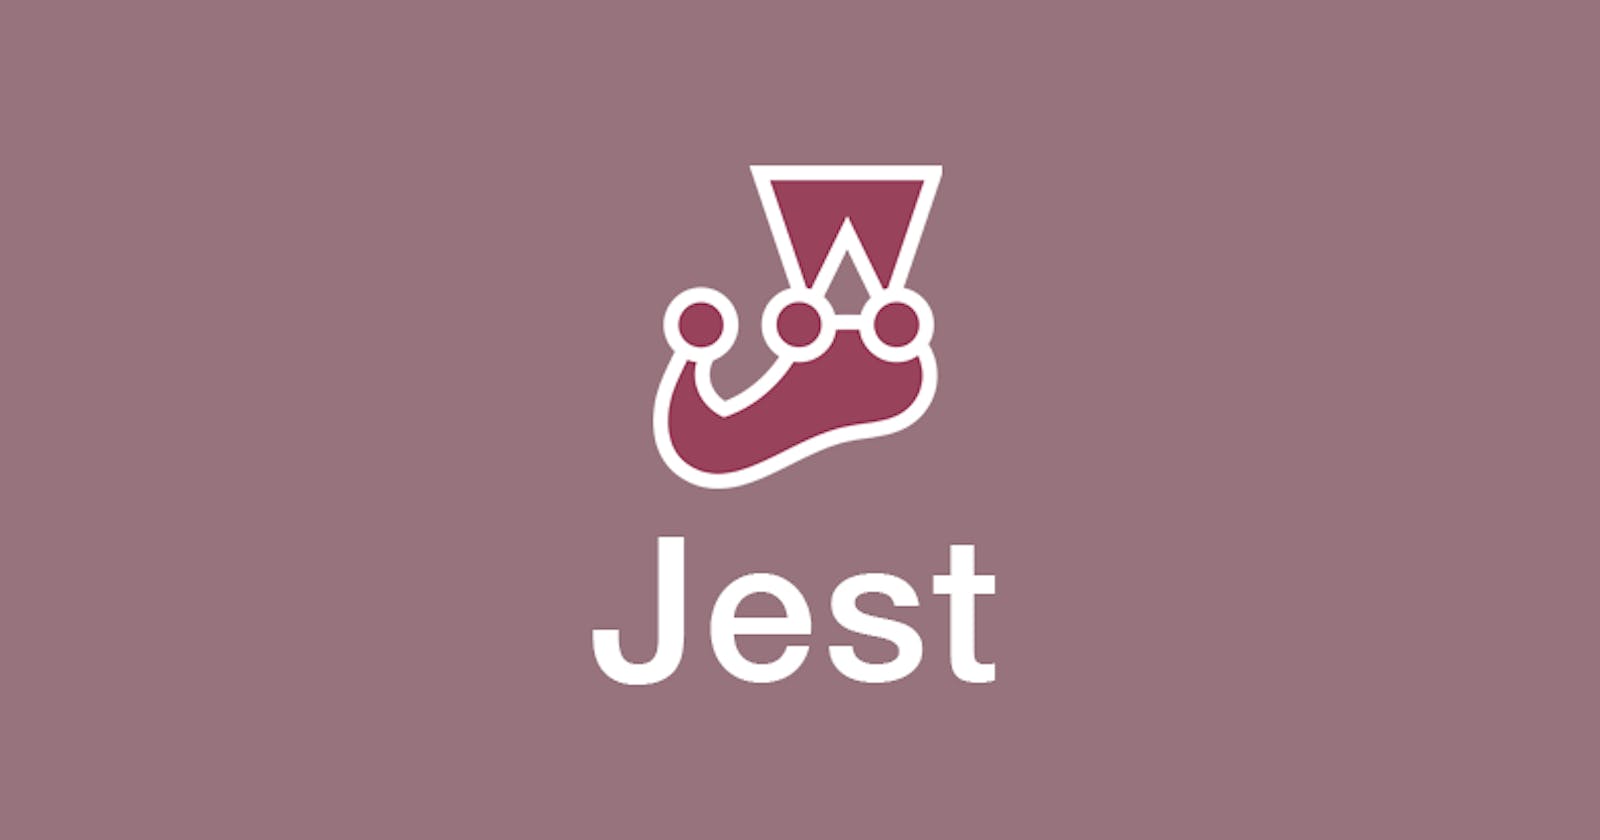 Adding code coverage and reporting with Jest